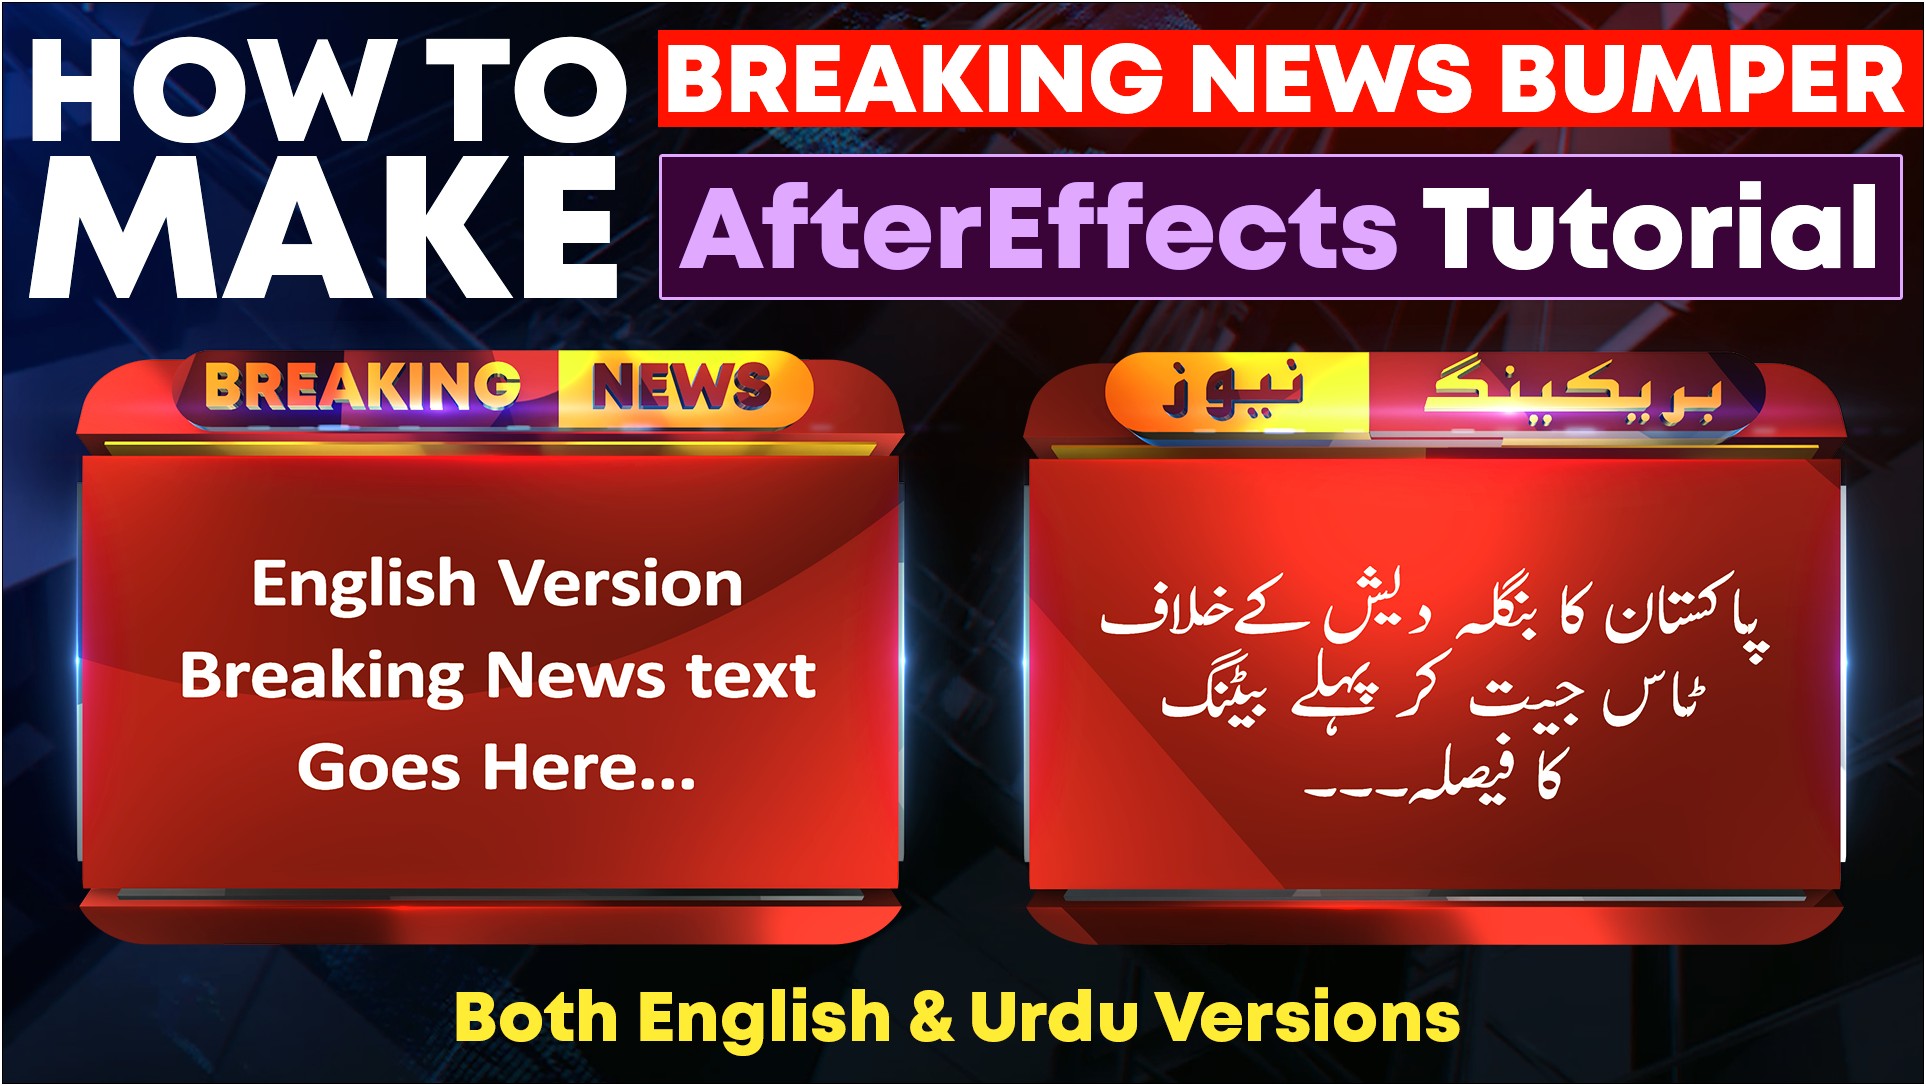 Adobe After Effects News Template Free